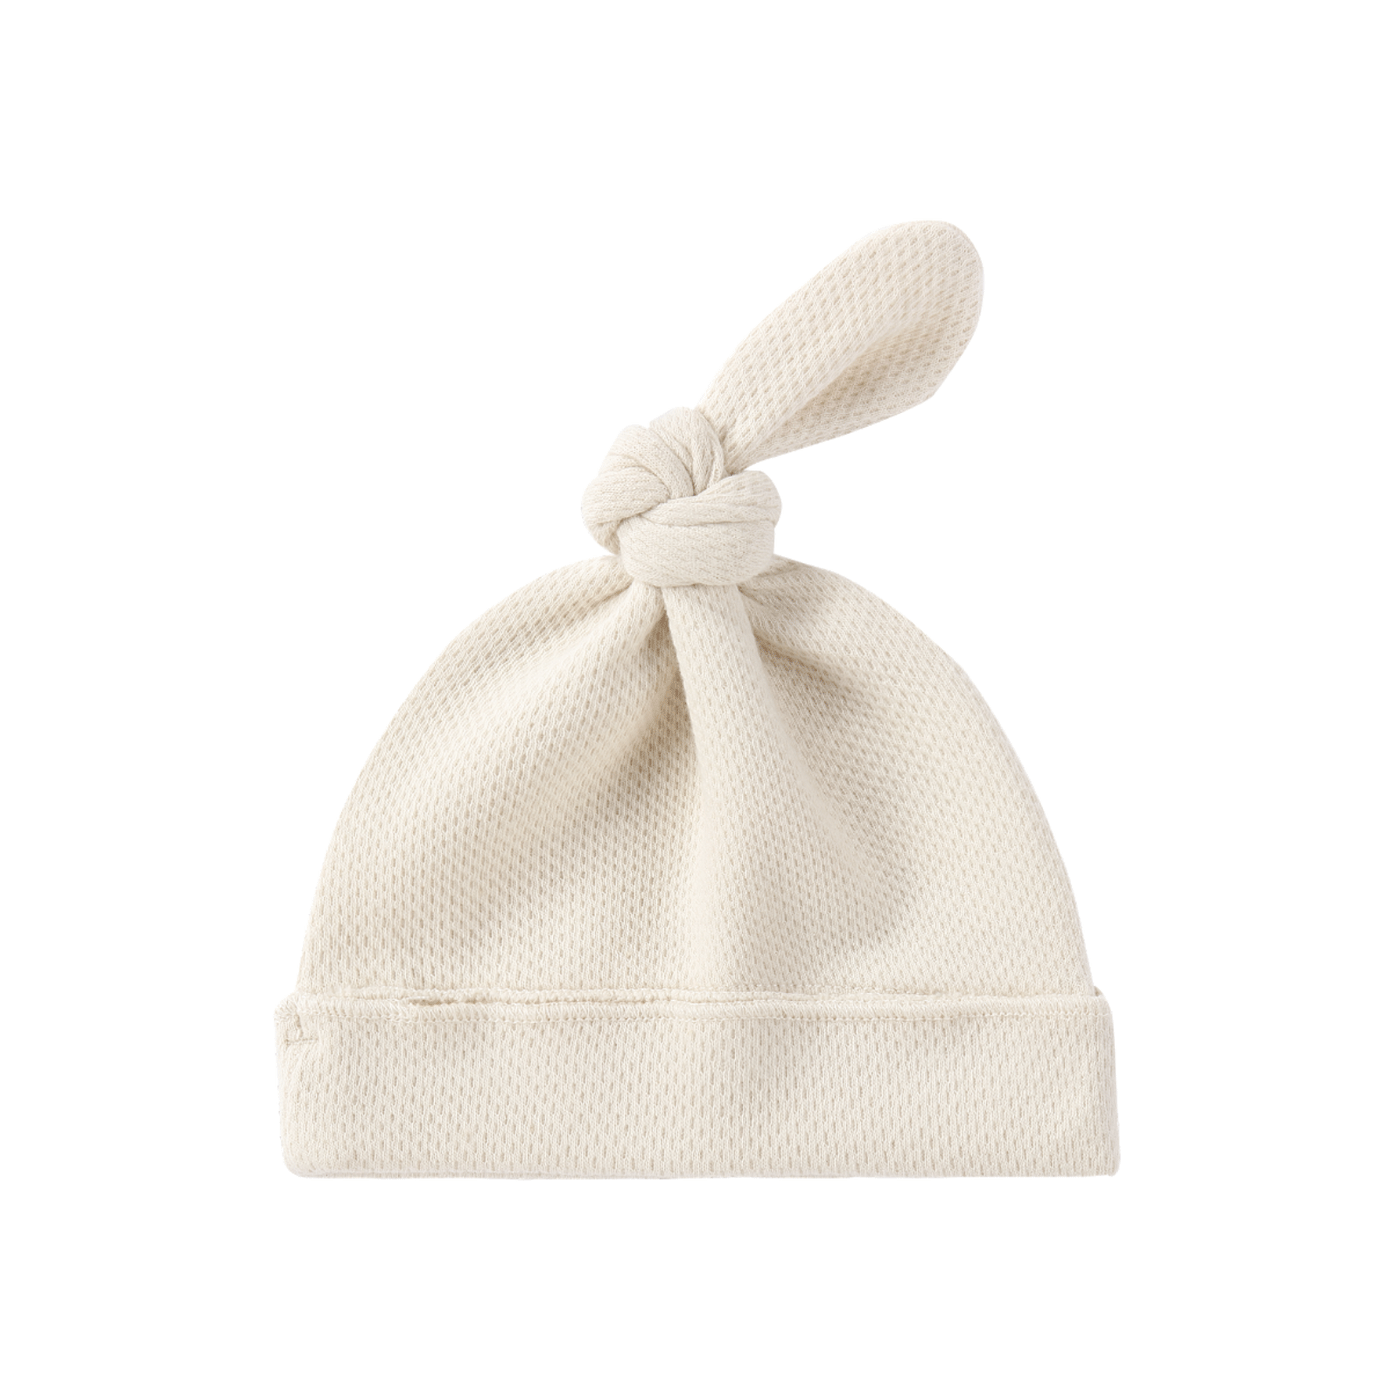 Knotted Hat - Pointelle Powder